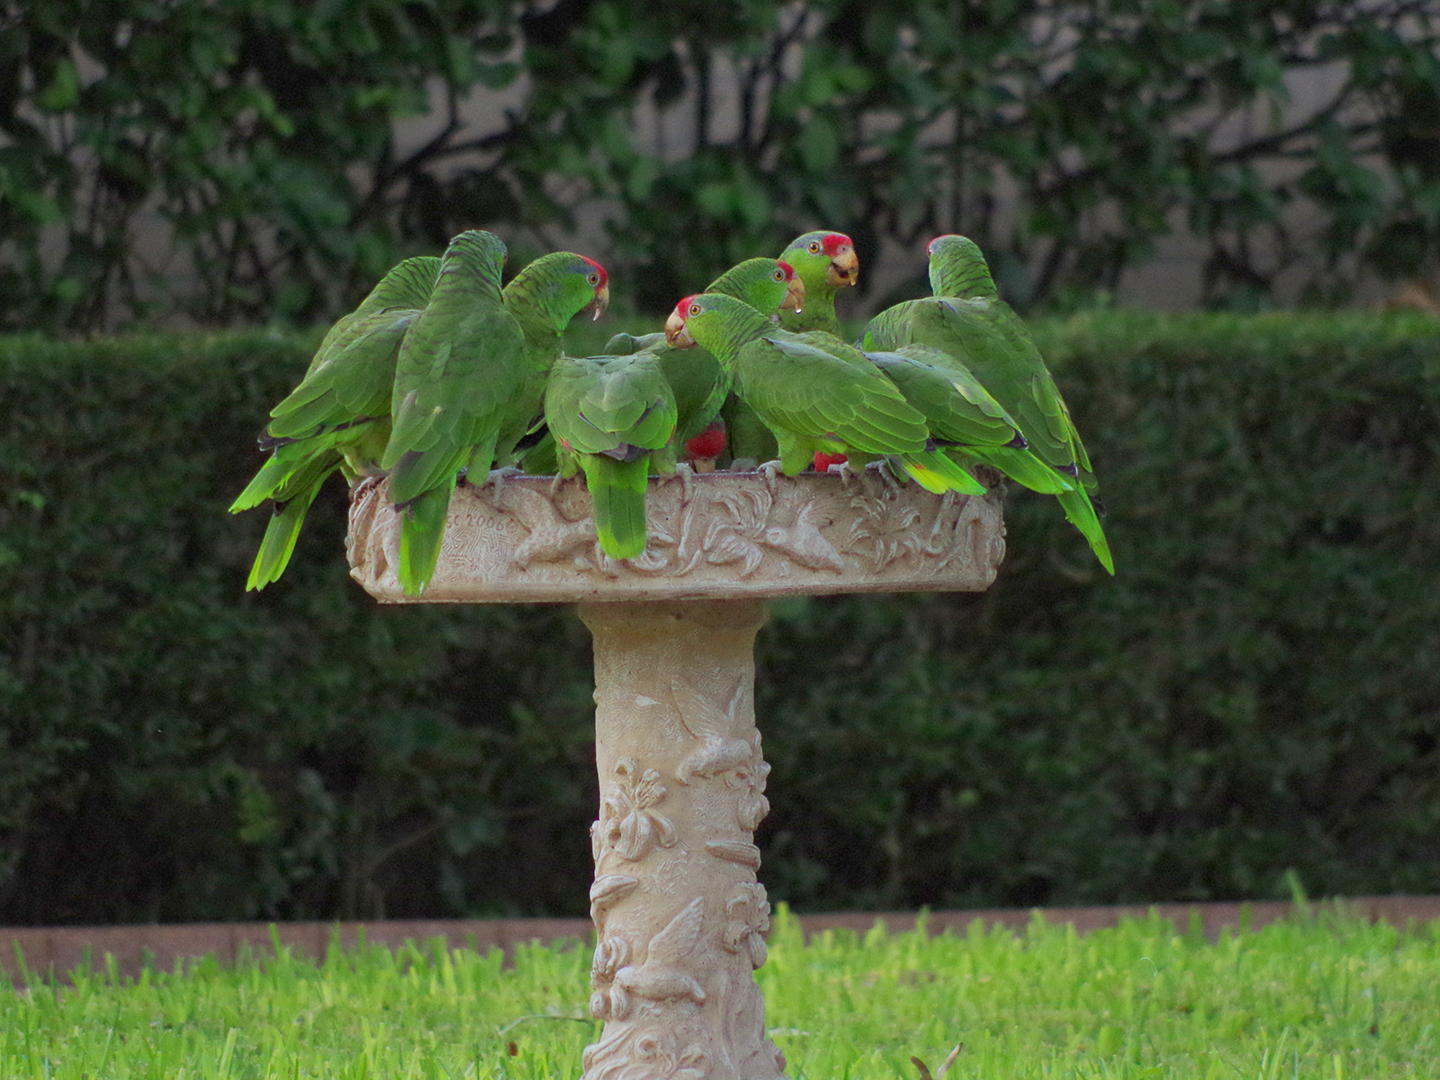 Texas A&M Researchers Show Endangered Parrot Species Is Thriving In Urban Areas